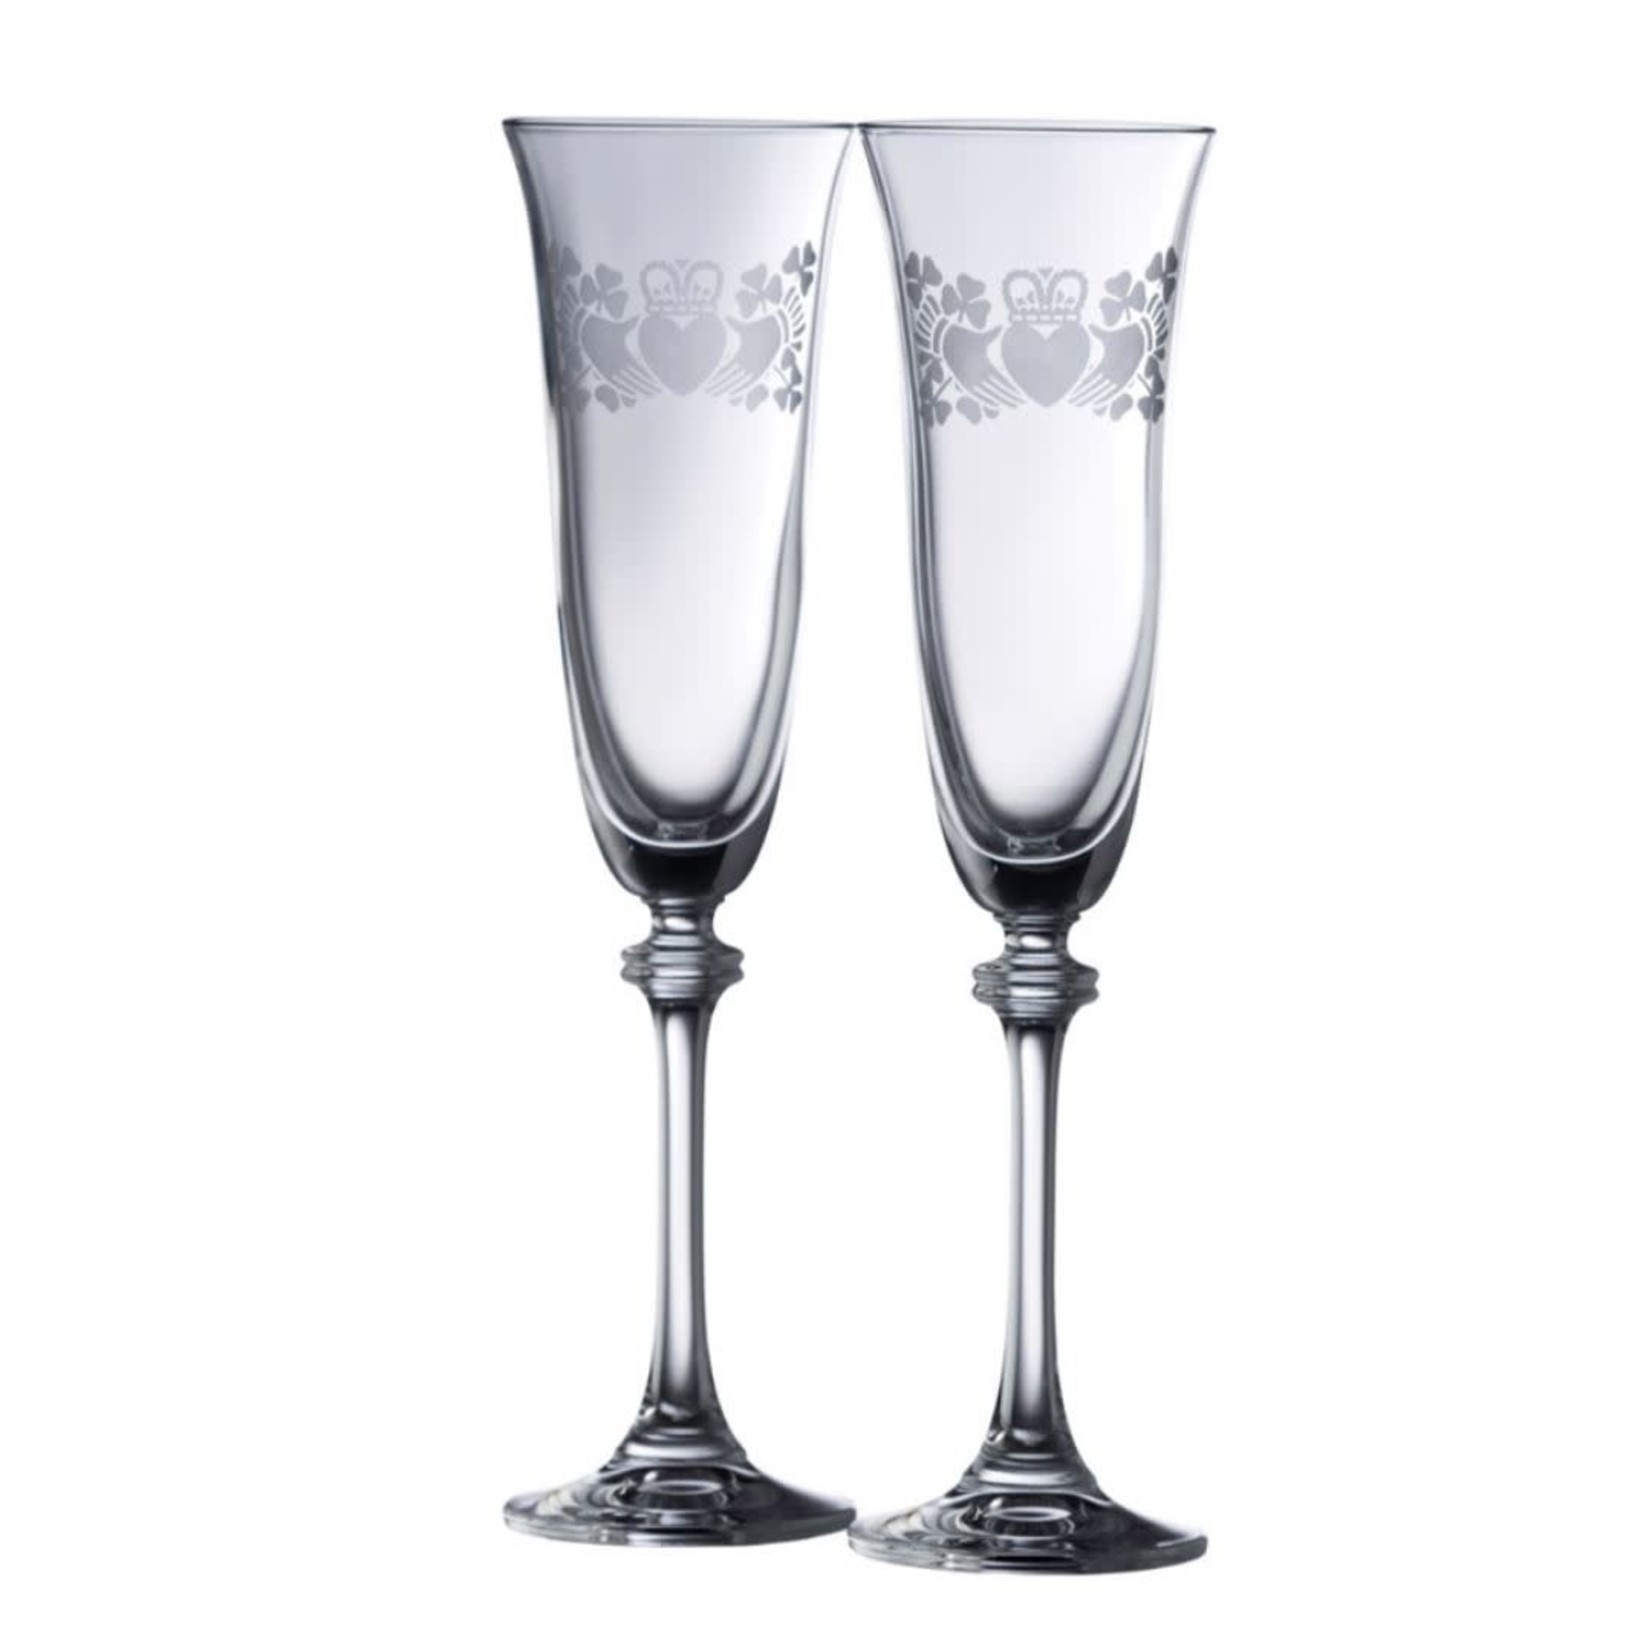 Galway Crystal Claddagh Liberty Flute Pair by Galway Crystal